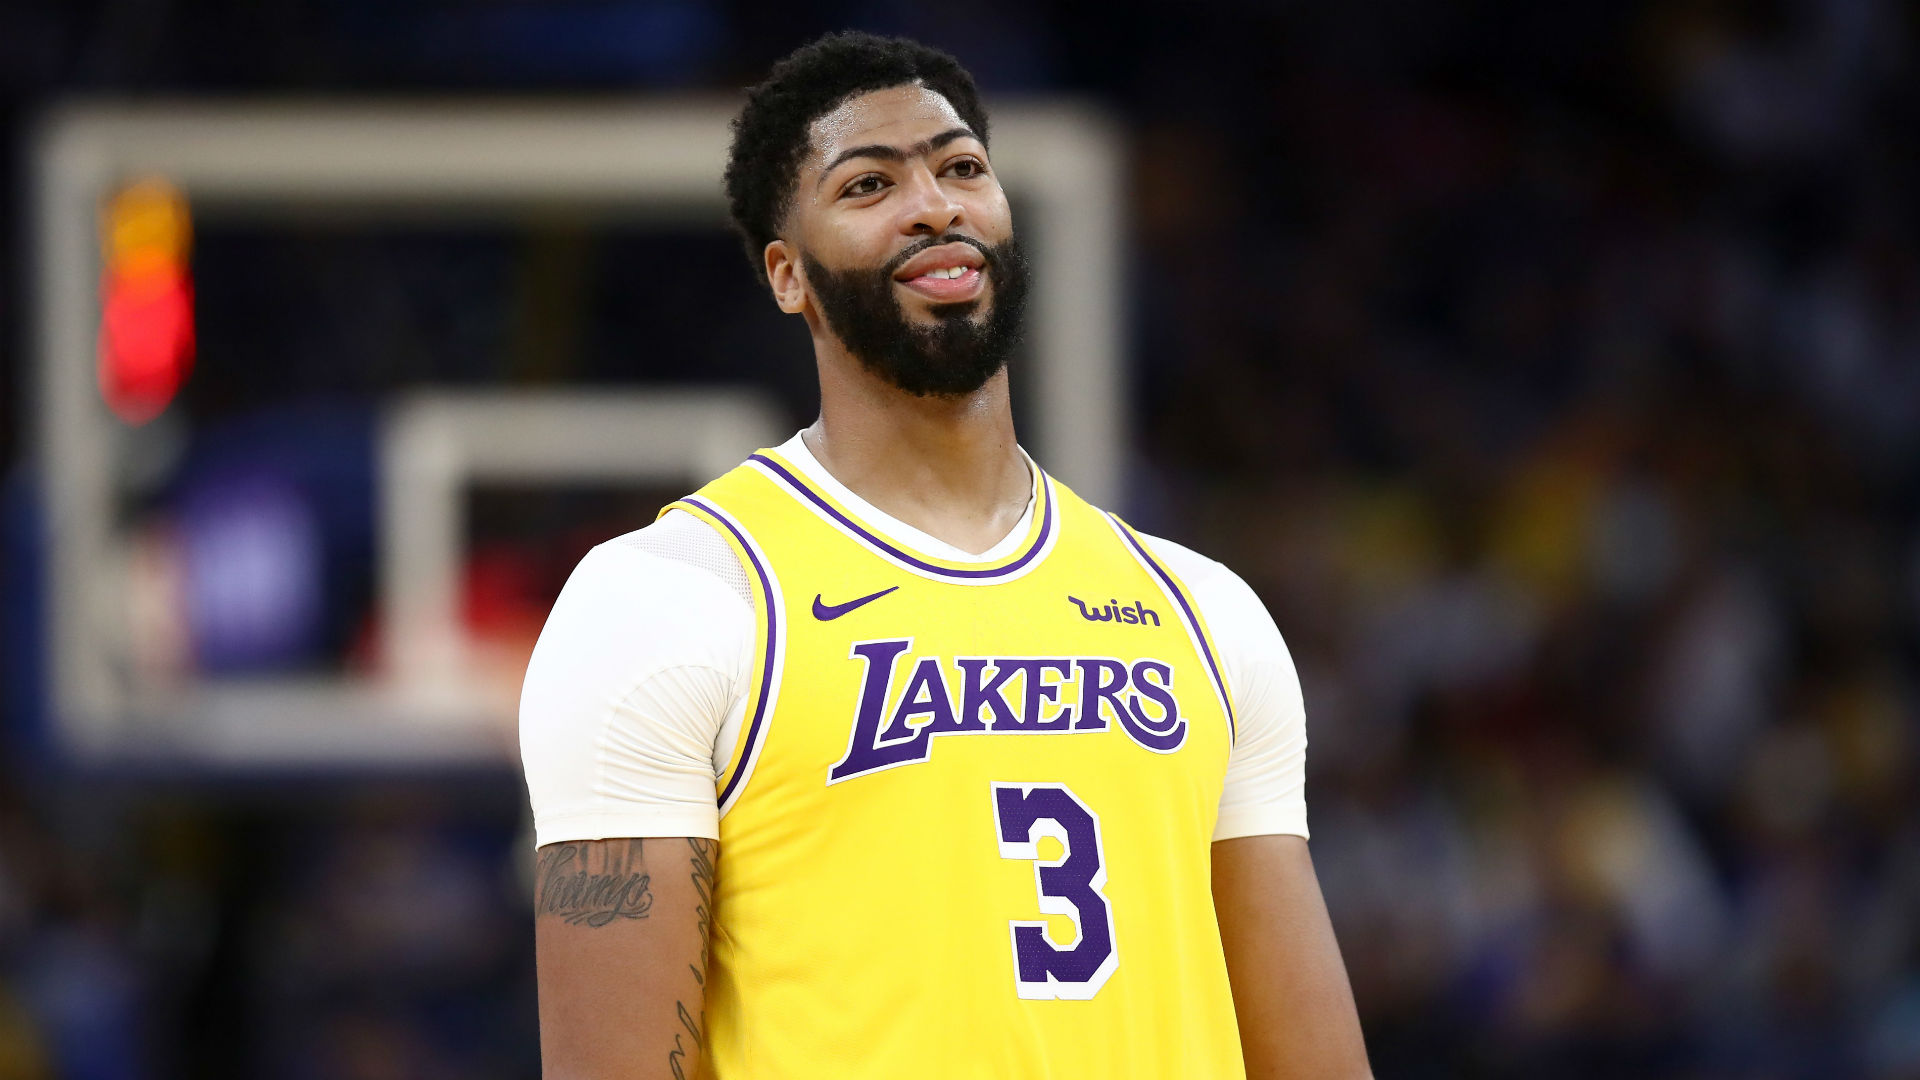 NBA Rumors: Anthony Davis Decline Lakers Max Contract, Want to Explore ...